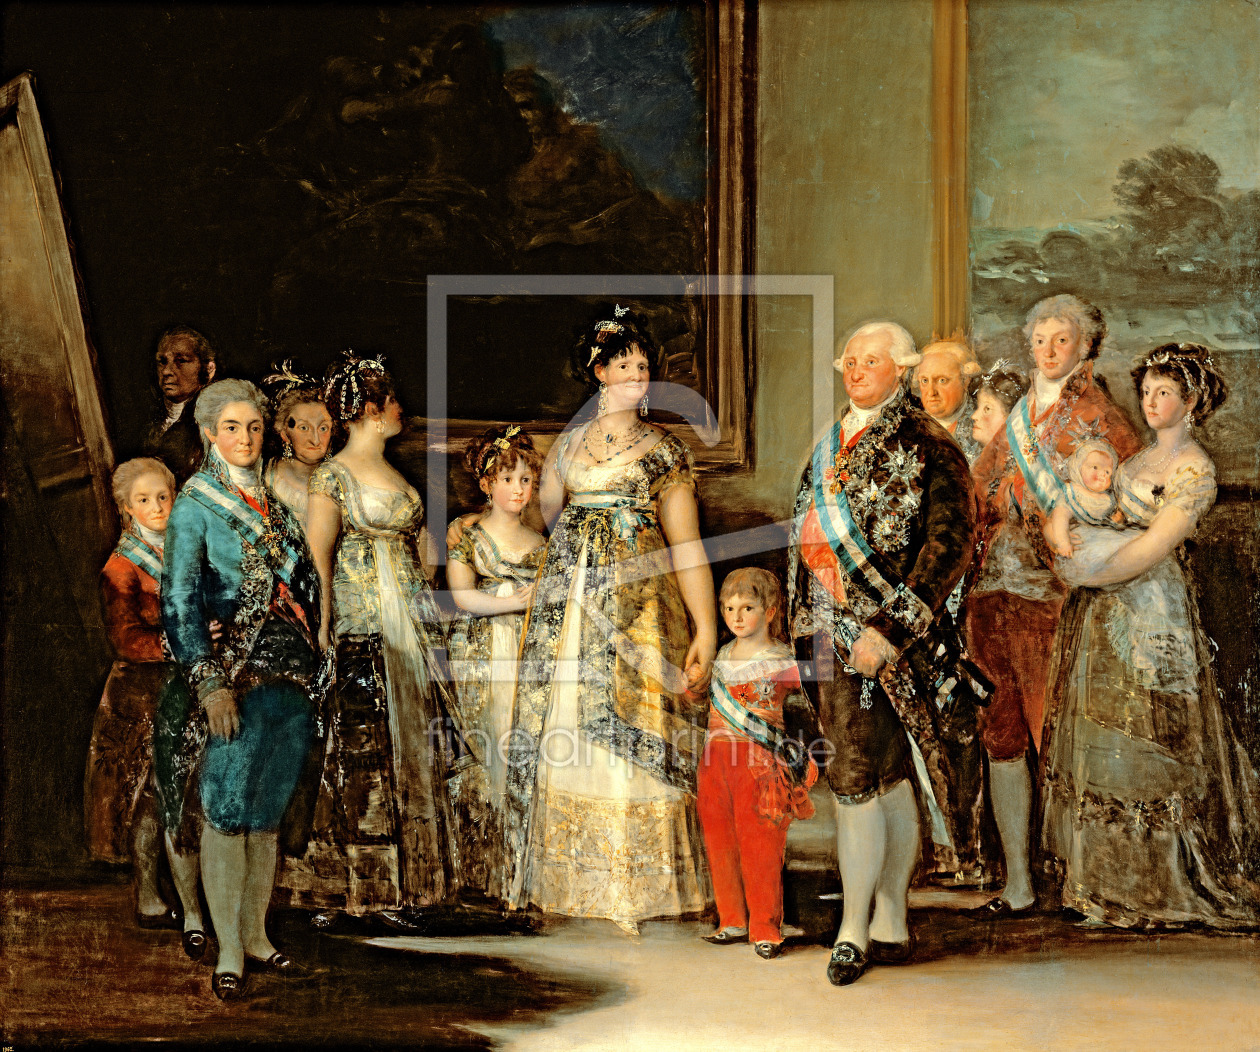 Bild-Nr.: 31000559 The King and Queen of Spain, Charles IV and Maria Luisa, with their family, 1800 erstellt von Goya, Francisco de